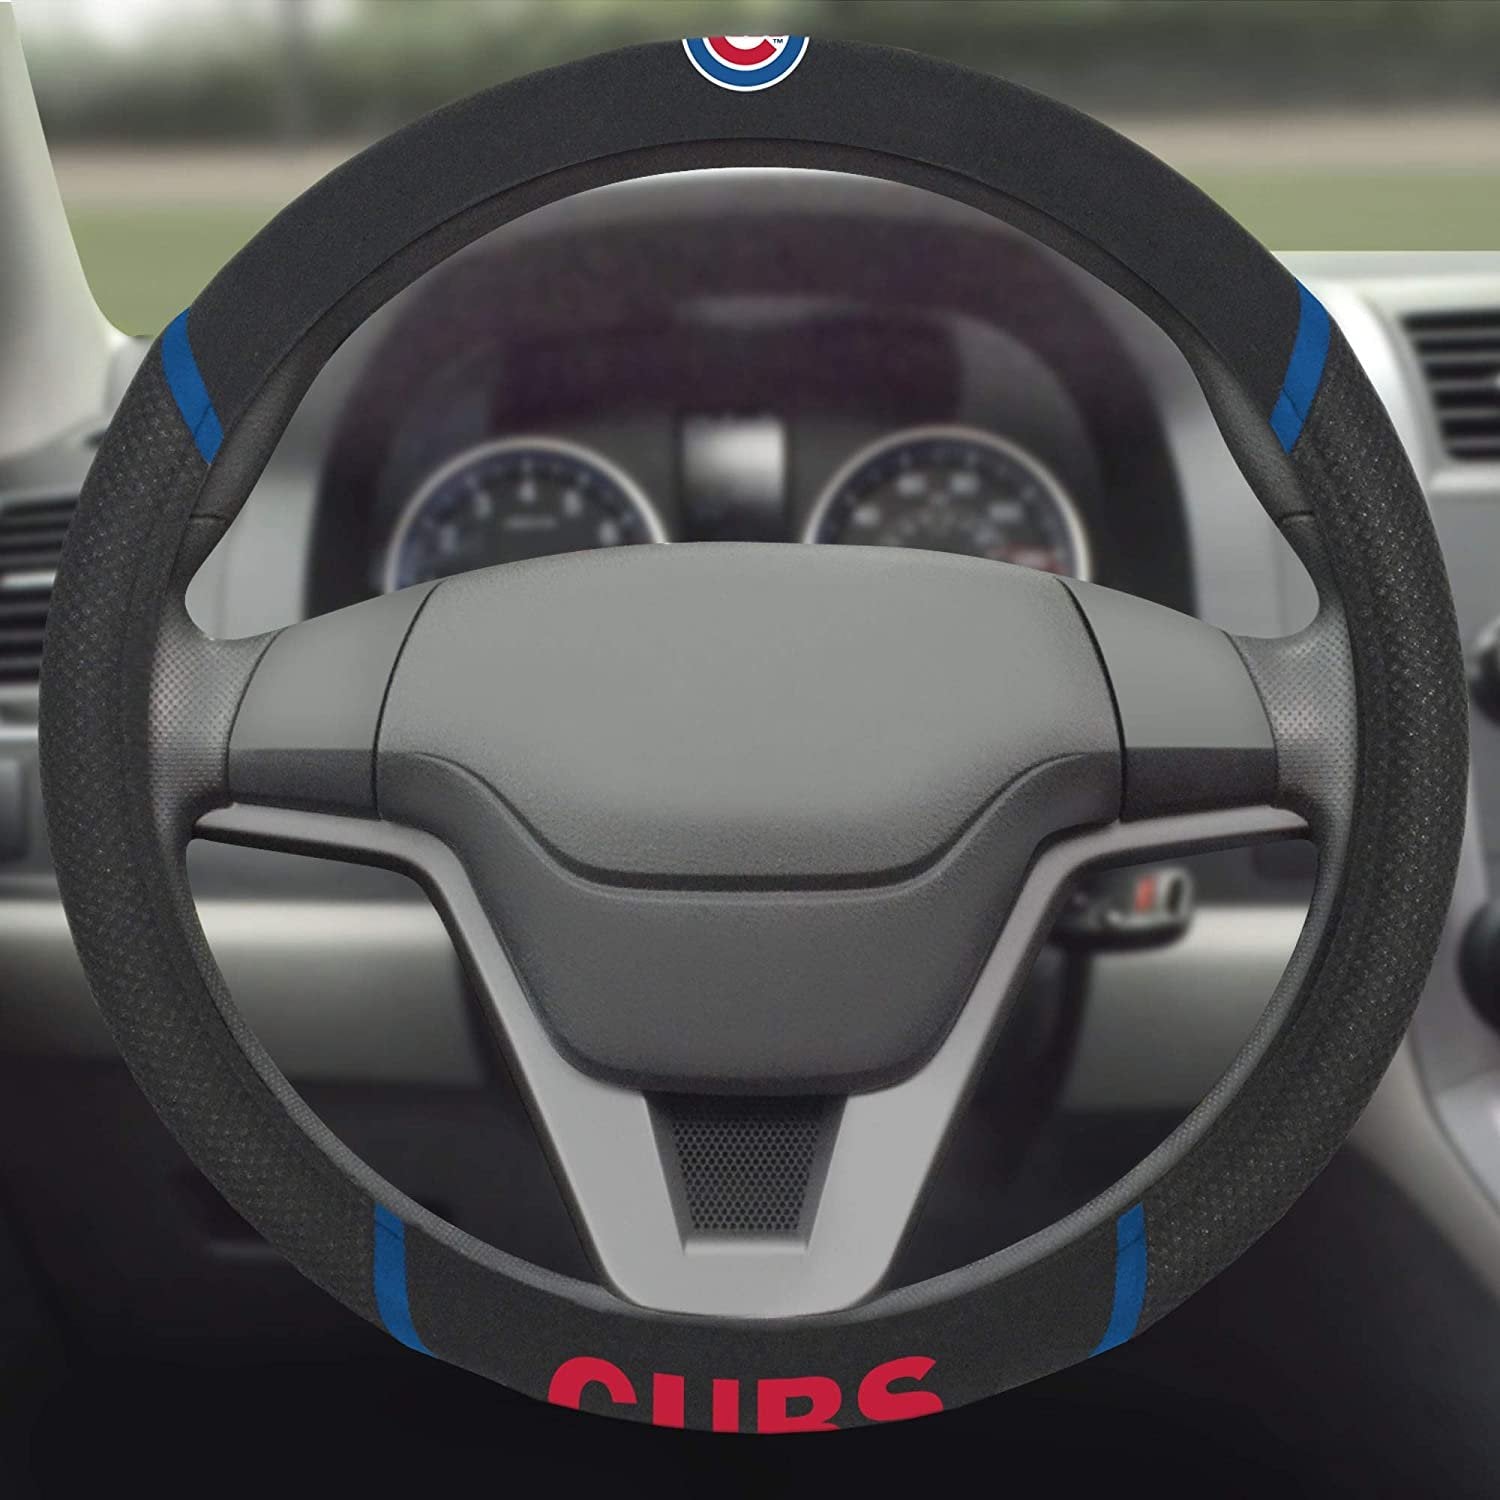 Chicago Cubs Steering Wheel Cover Premium Embroidered Black 15 Inch